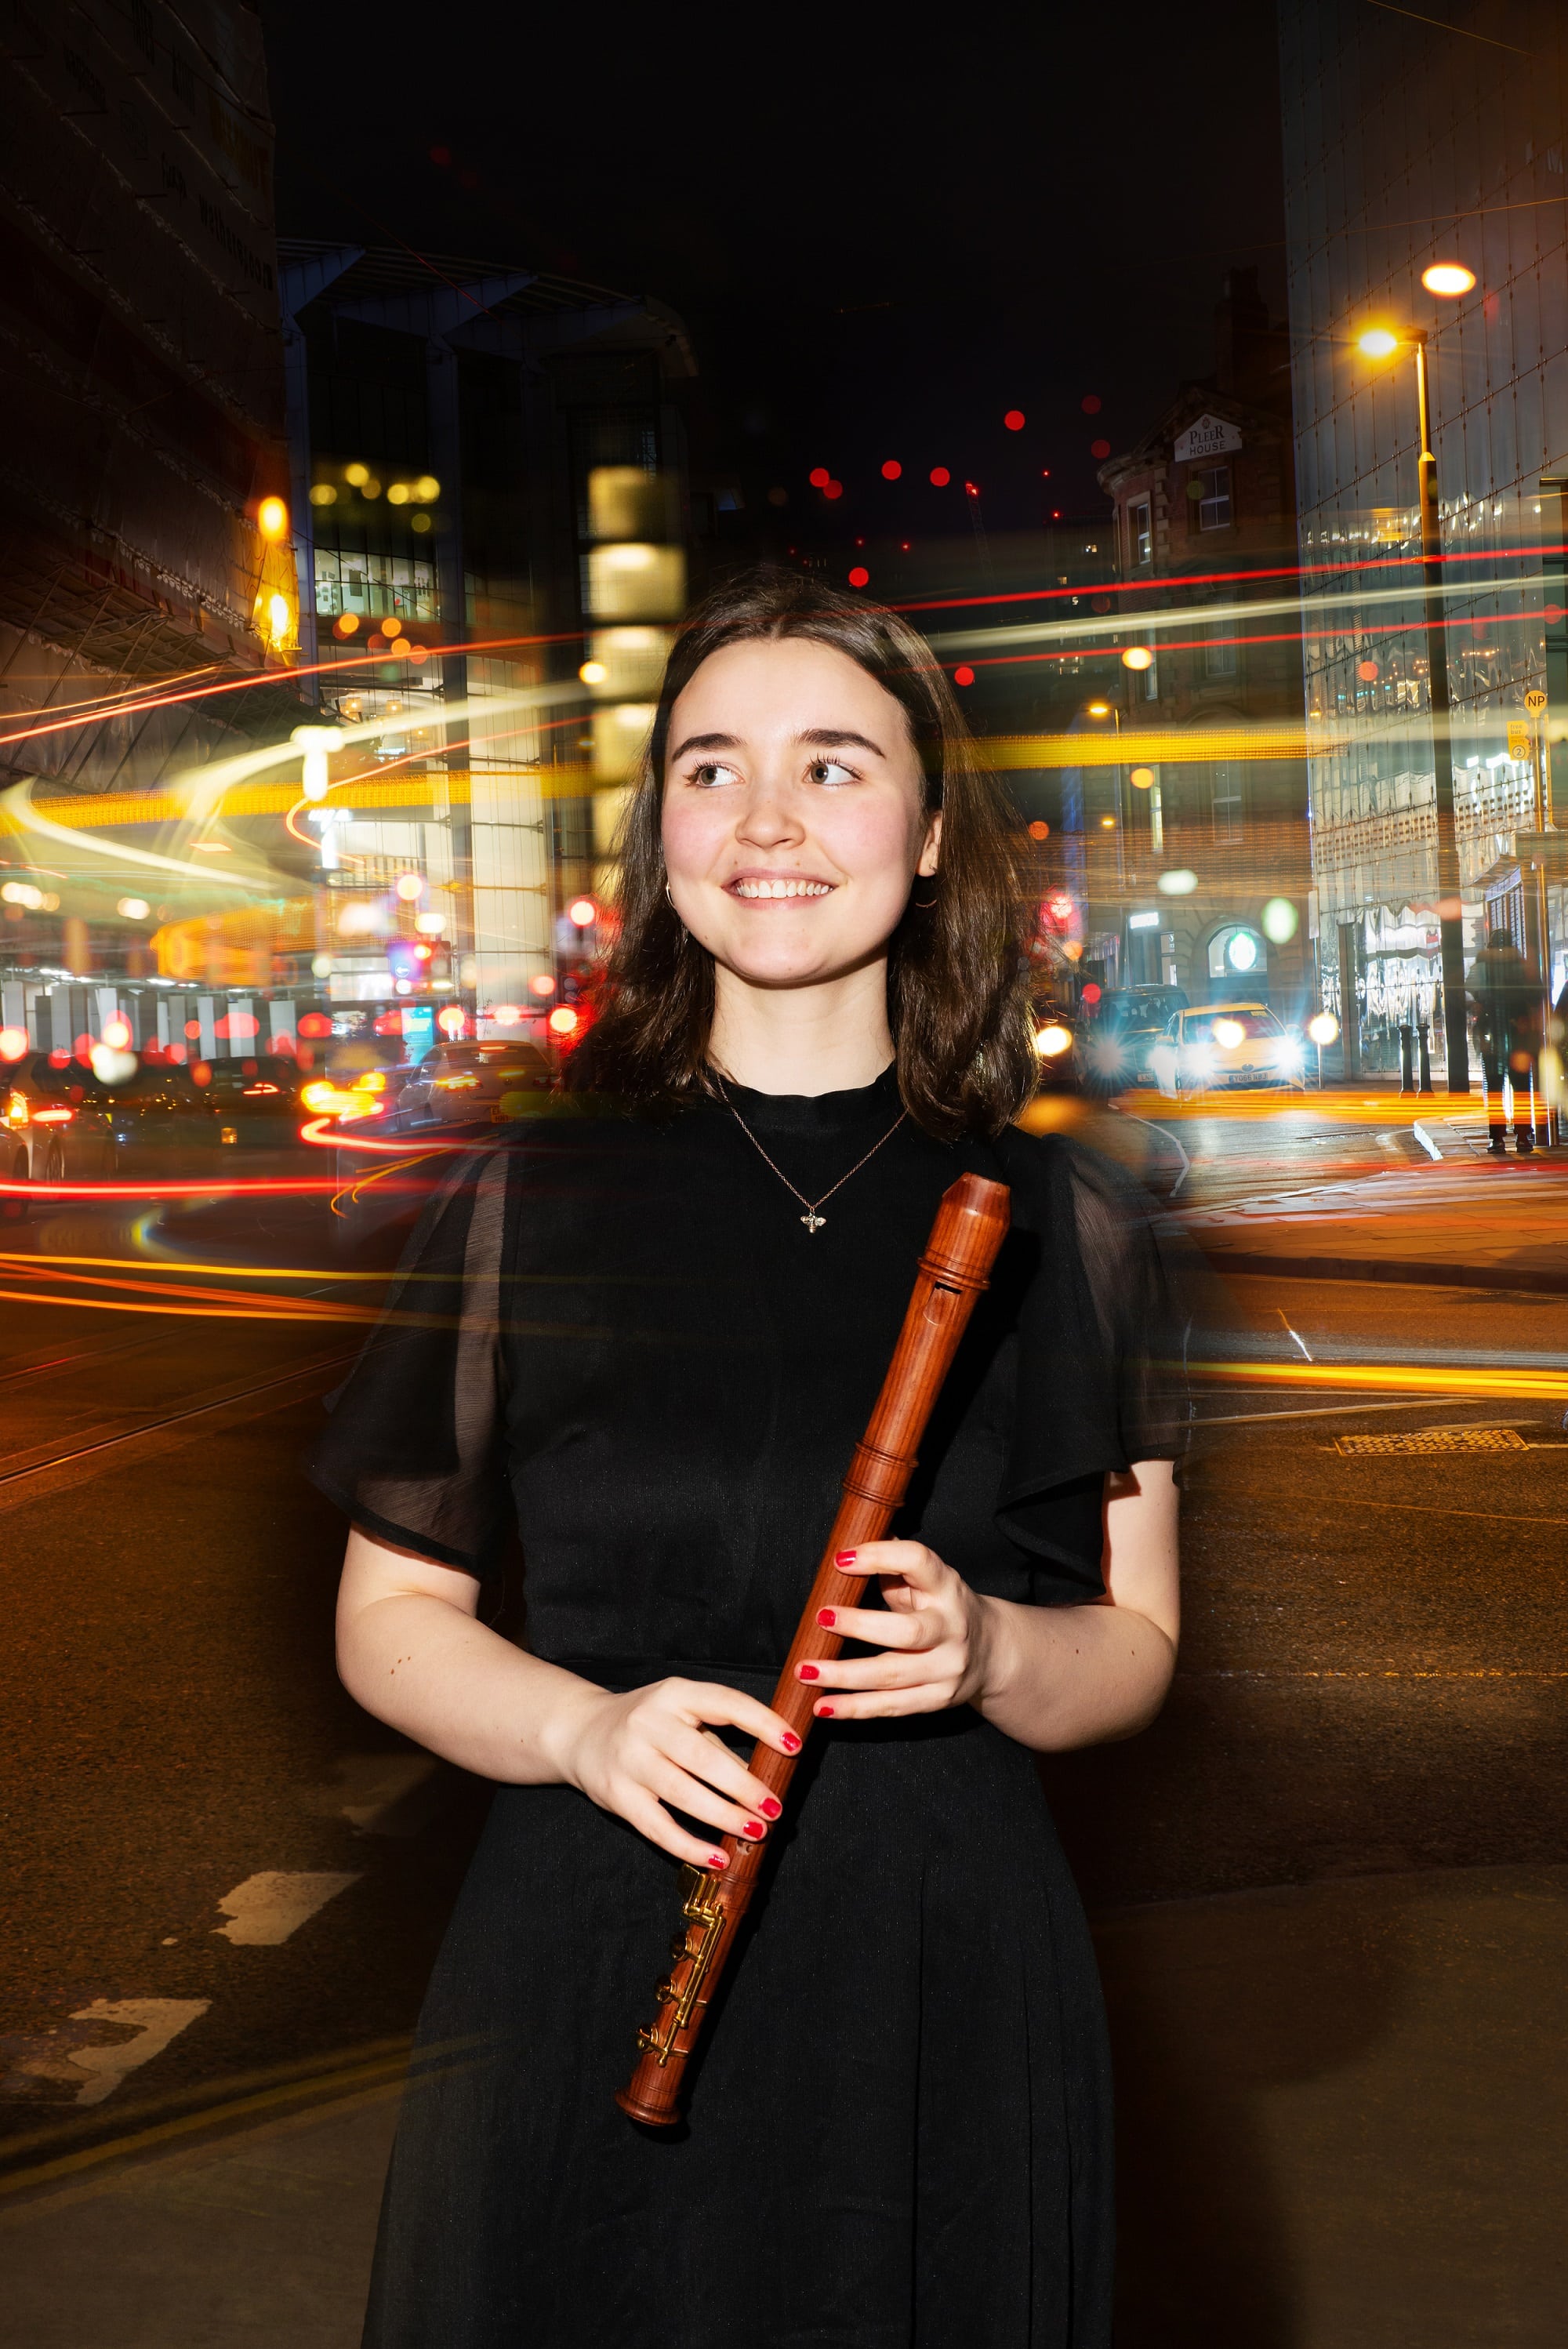 Shocking 80% drop in young recorder players